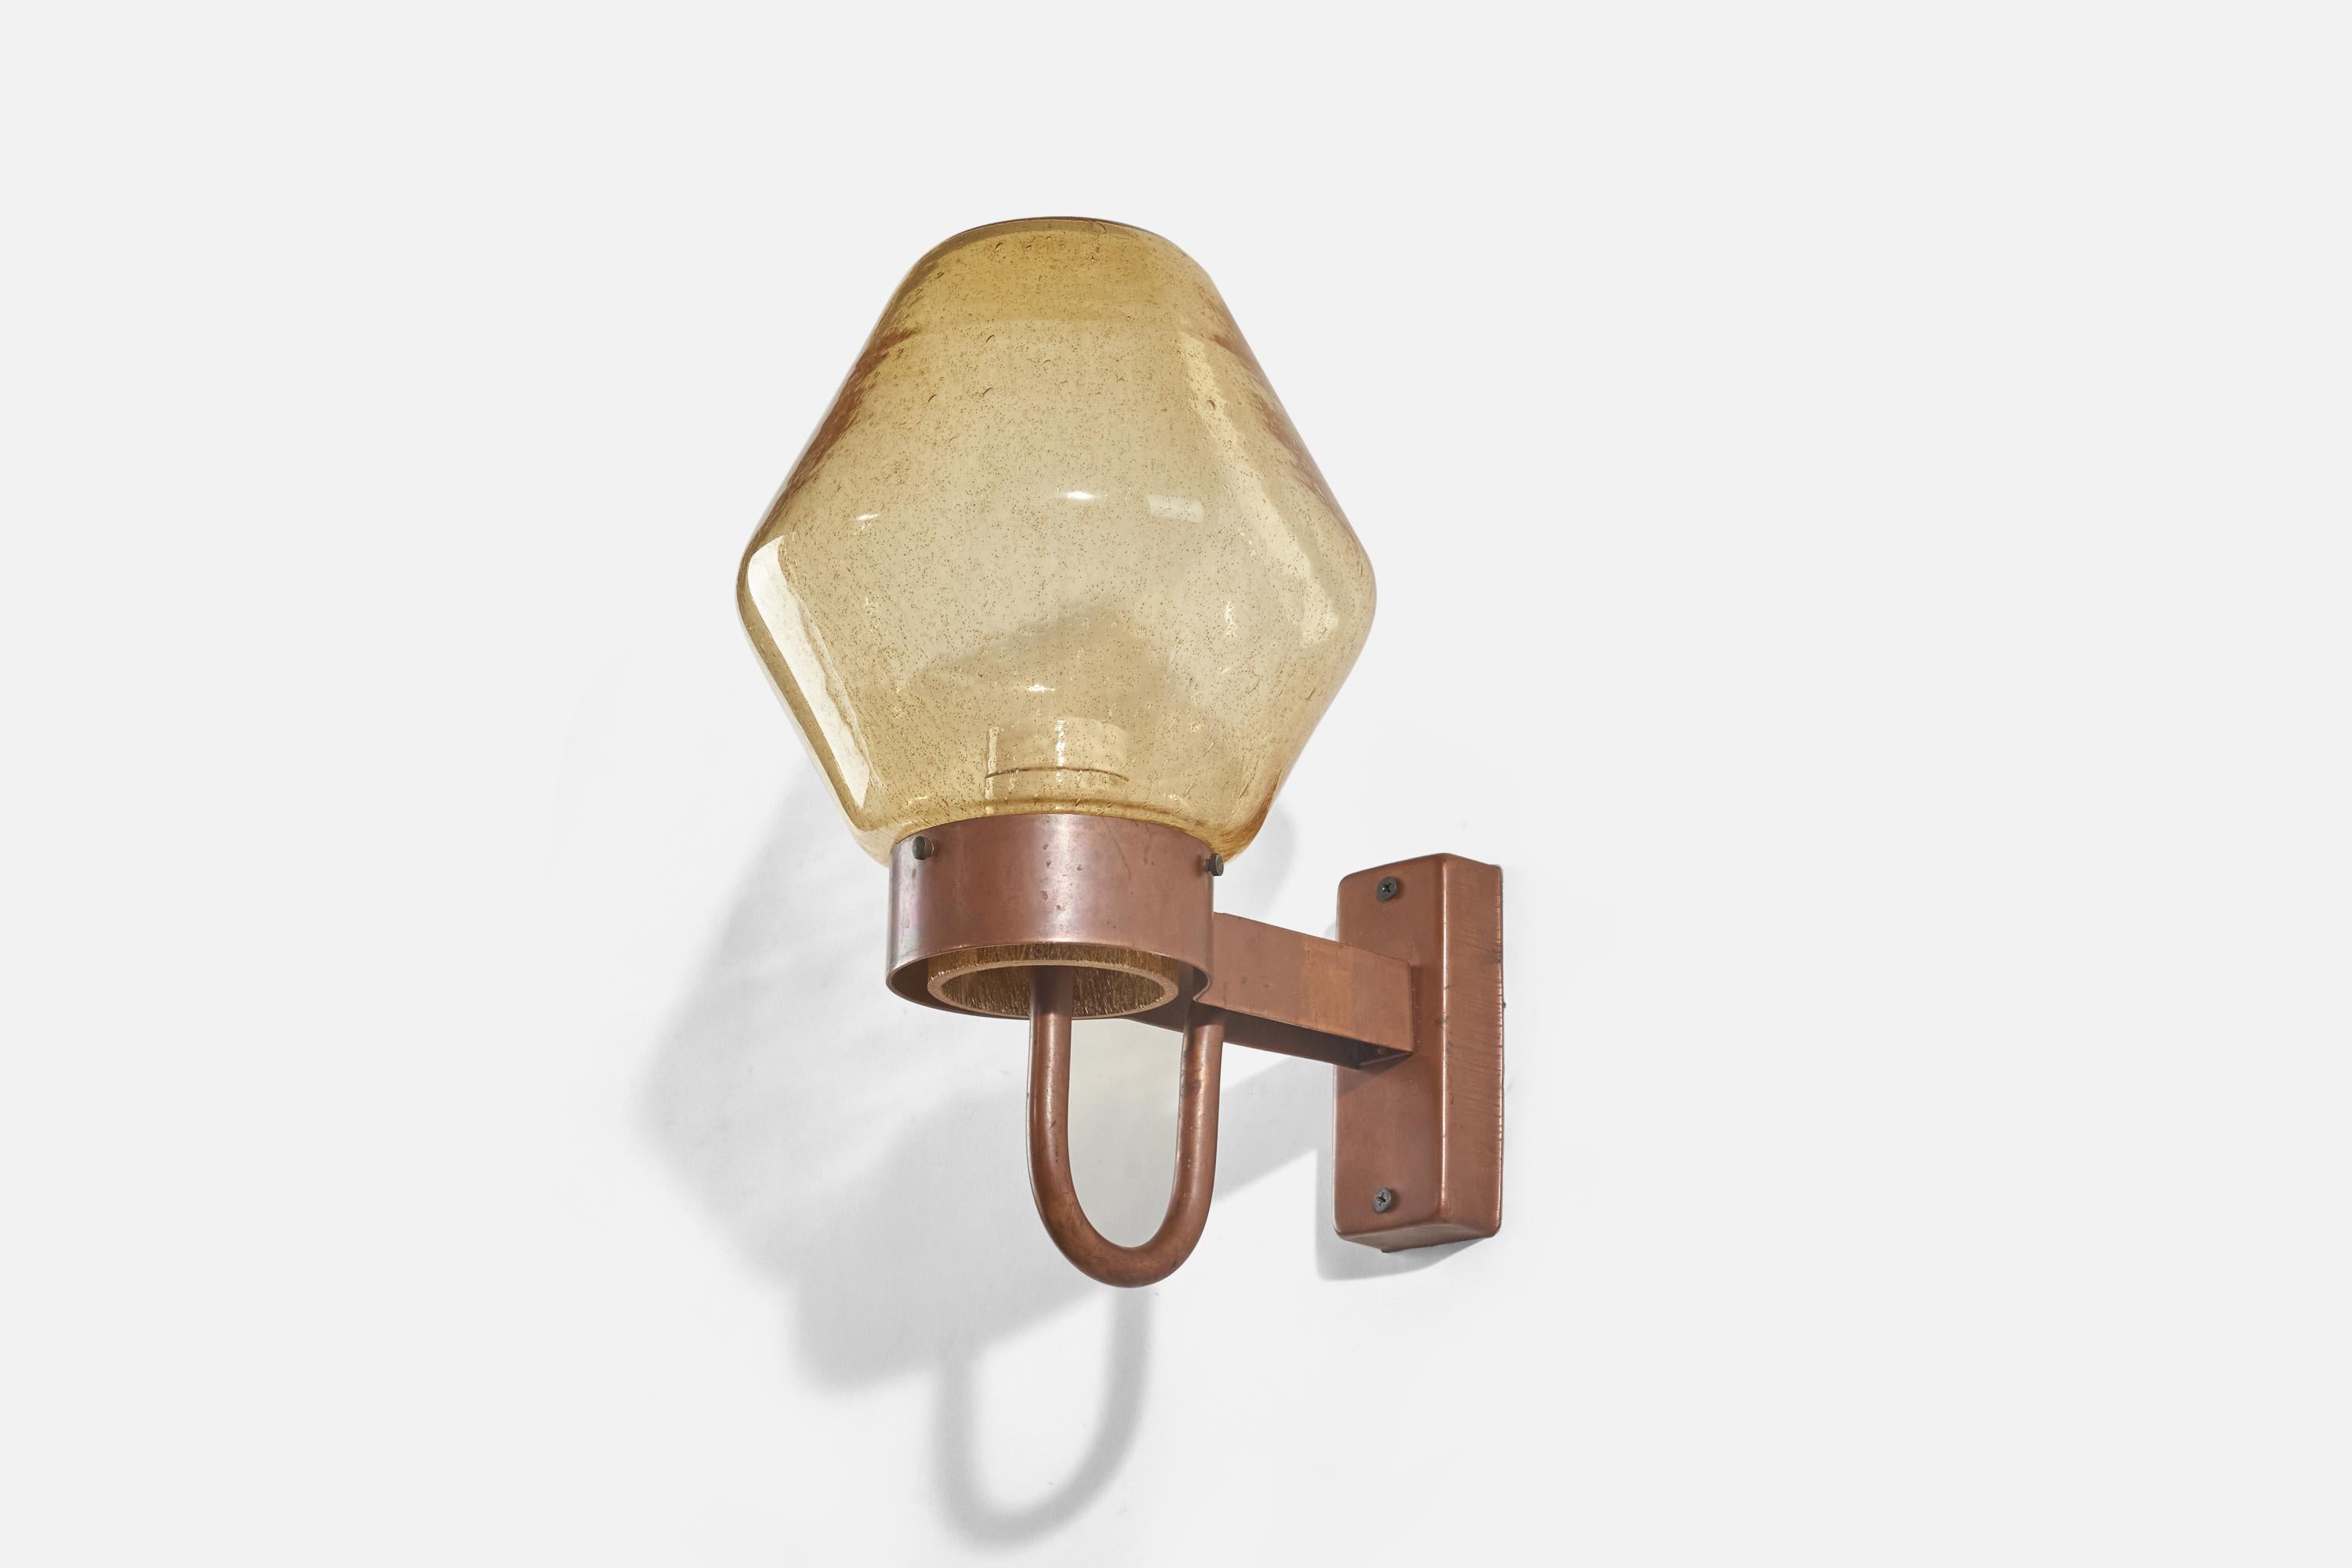 A copper and yellow glass sconce / wall light designed and produced by Hans-Agne Jakobsson, Sweden. c. 1960s.

Socket takes standard E-26 medium base bulb.

Dimensions of back plate (inches) : 5 x 2.06 x 1.12 (height x width x depth)

There is